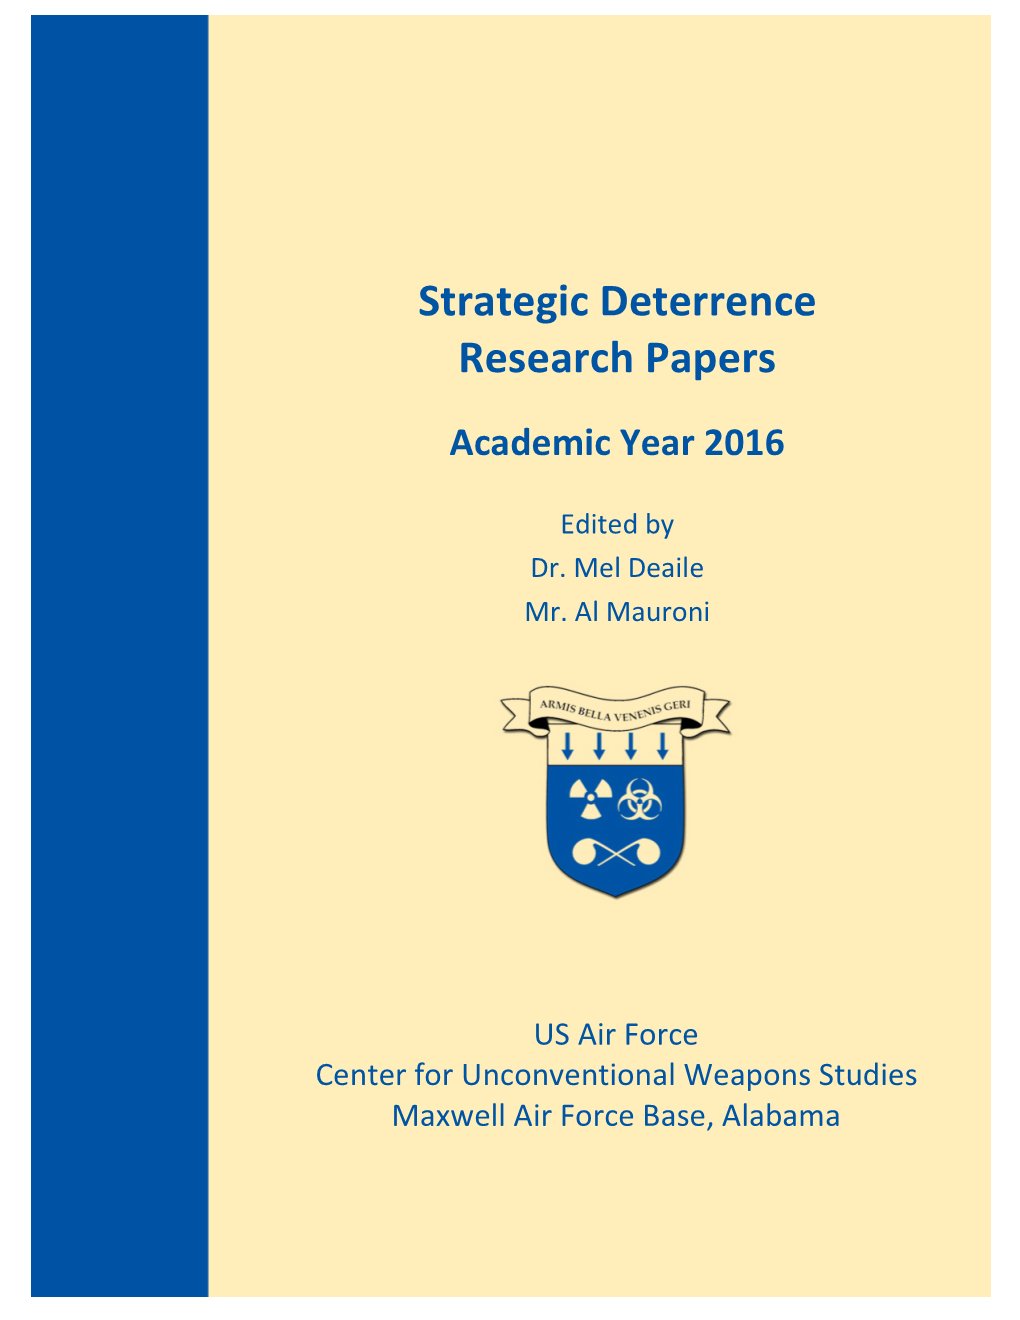 Strategic Deterrence Research Papers, 2016